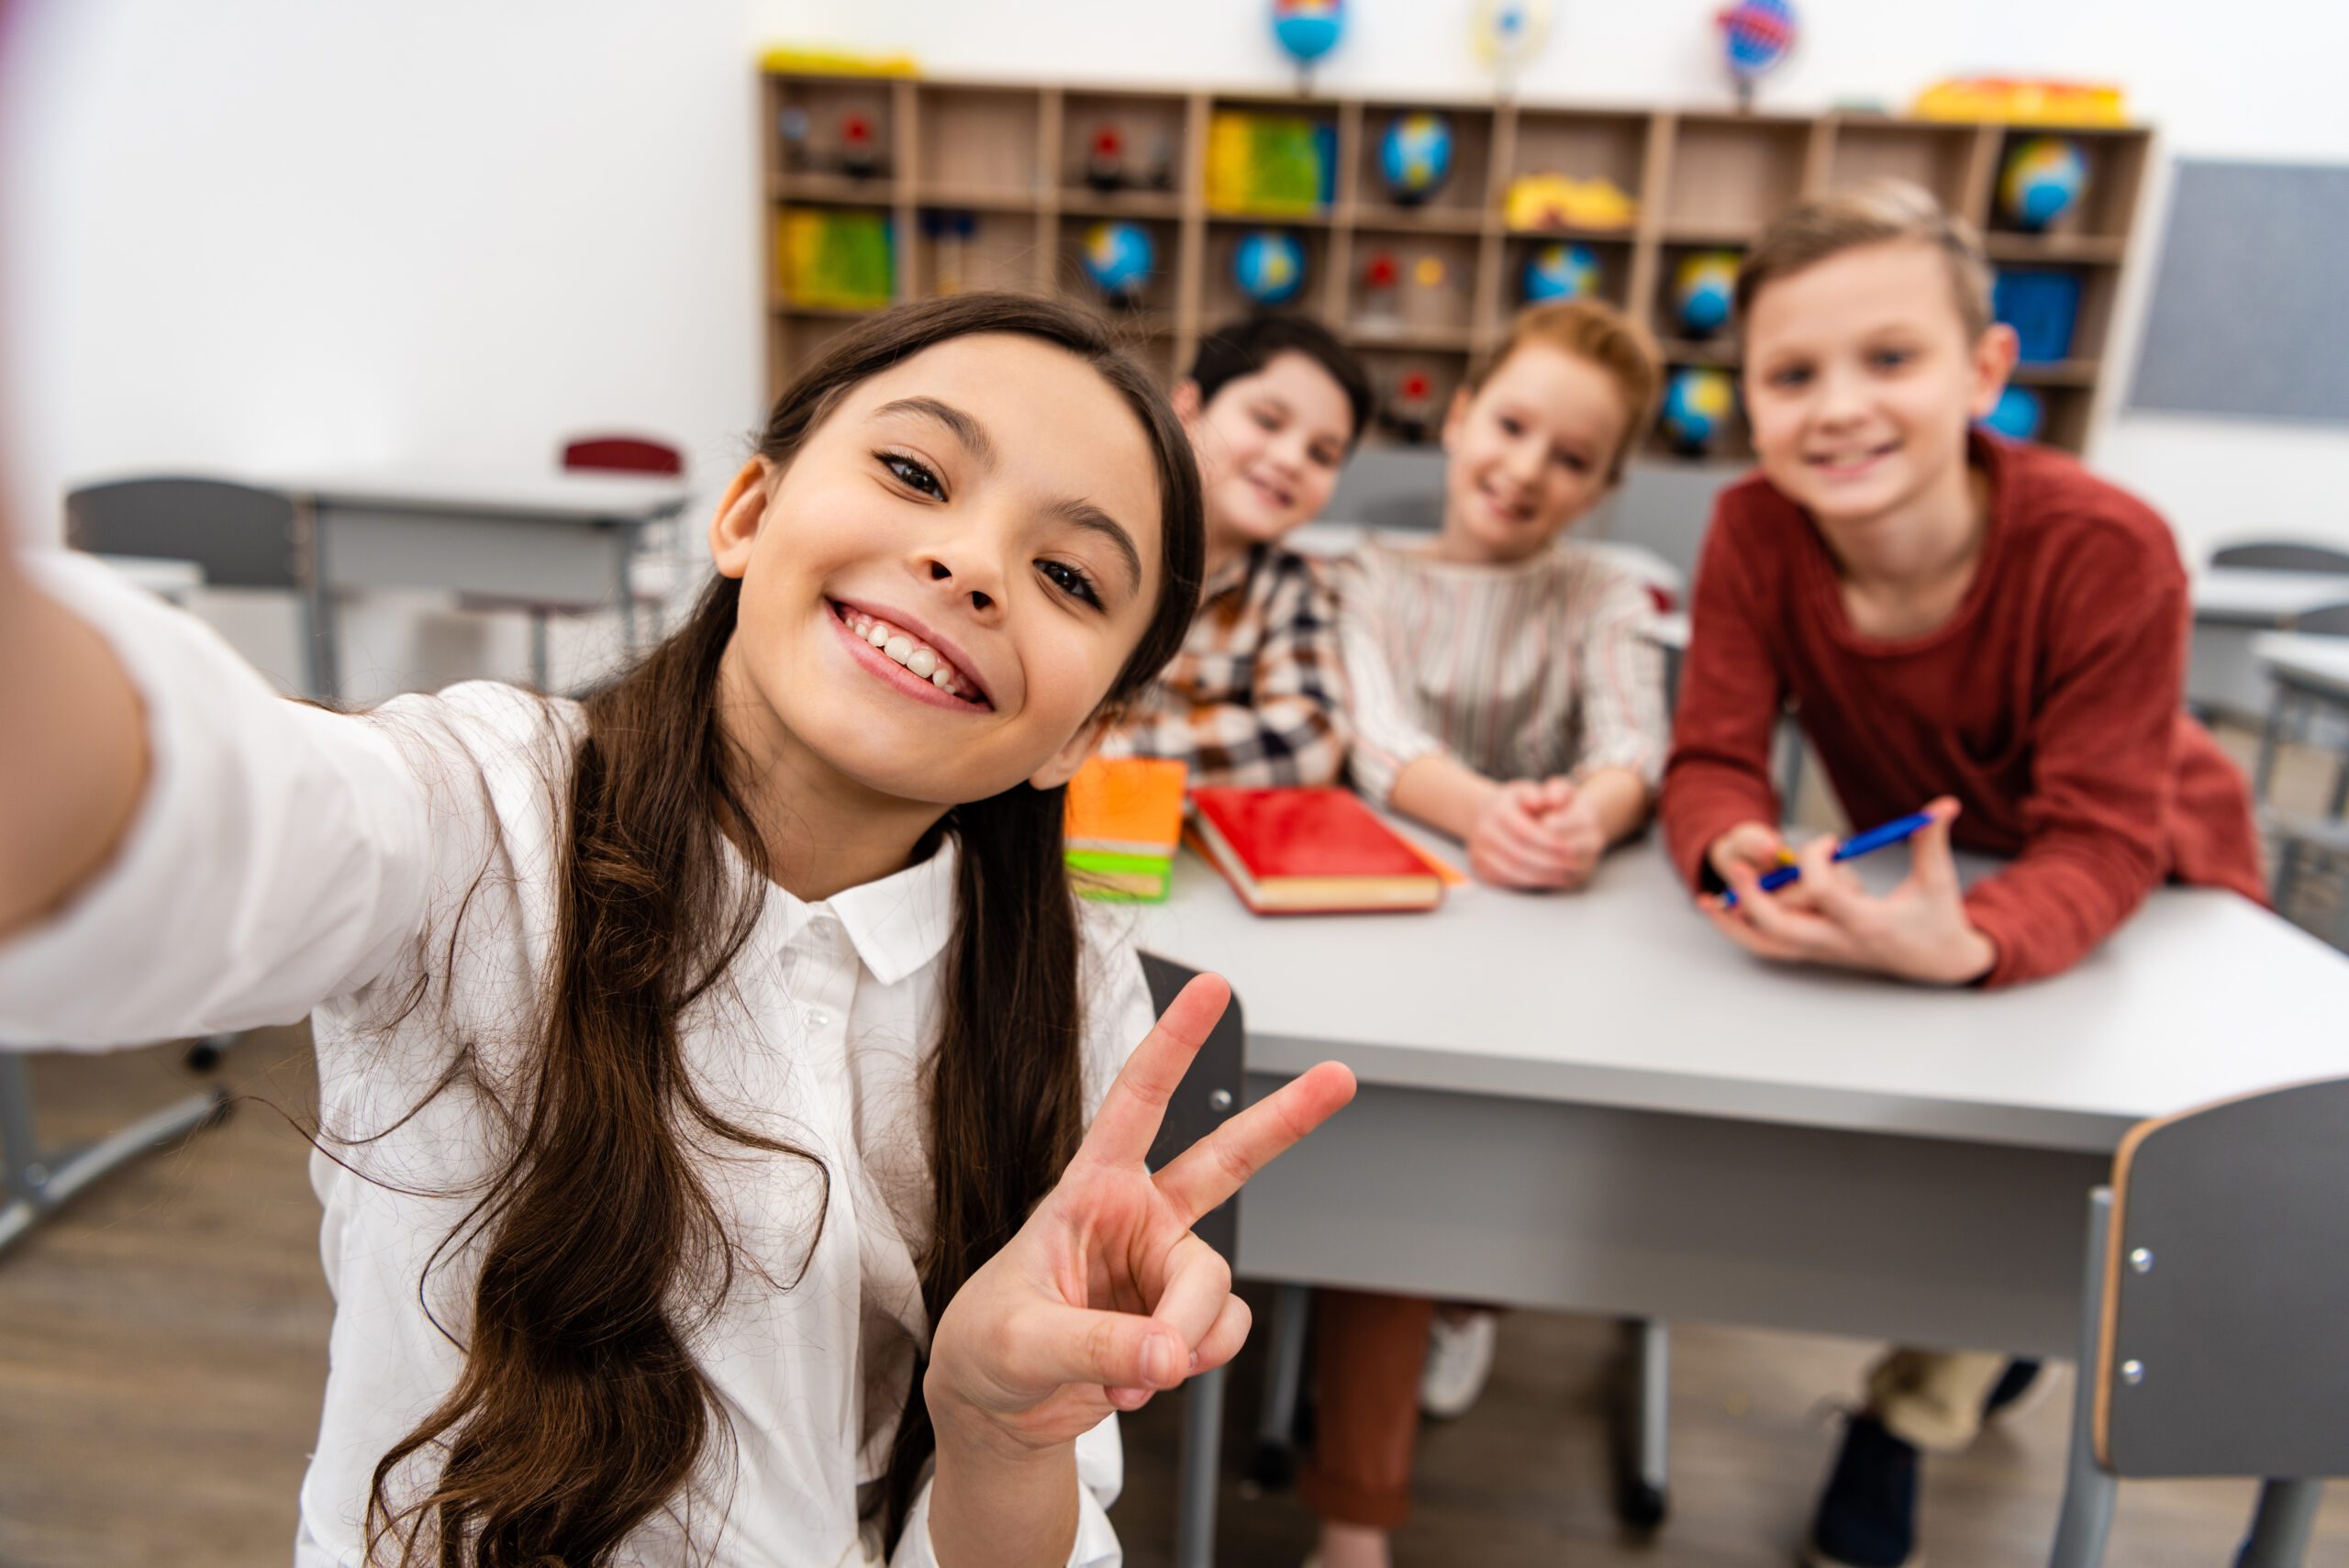 students showing peace in the classroom